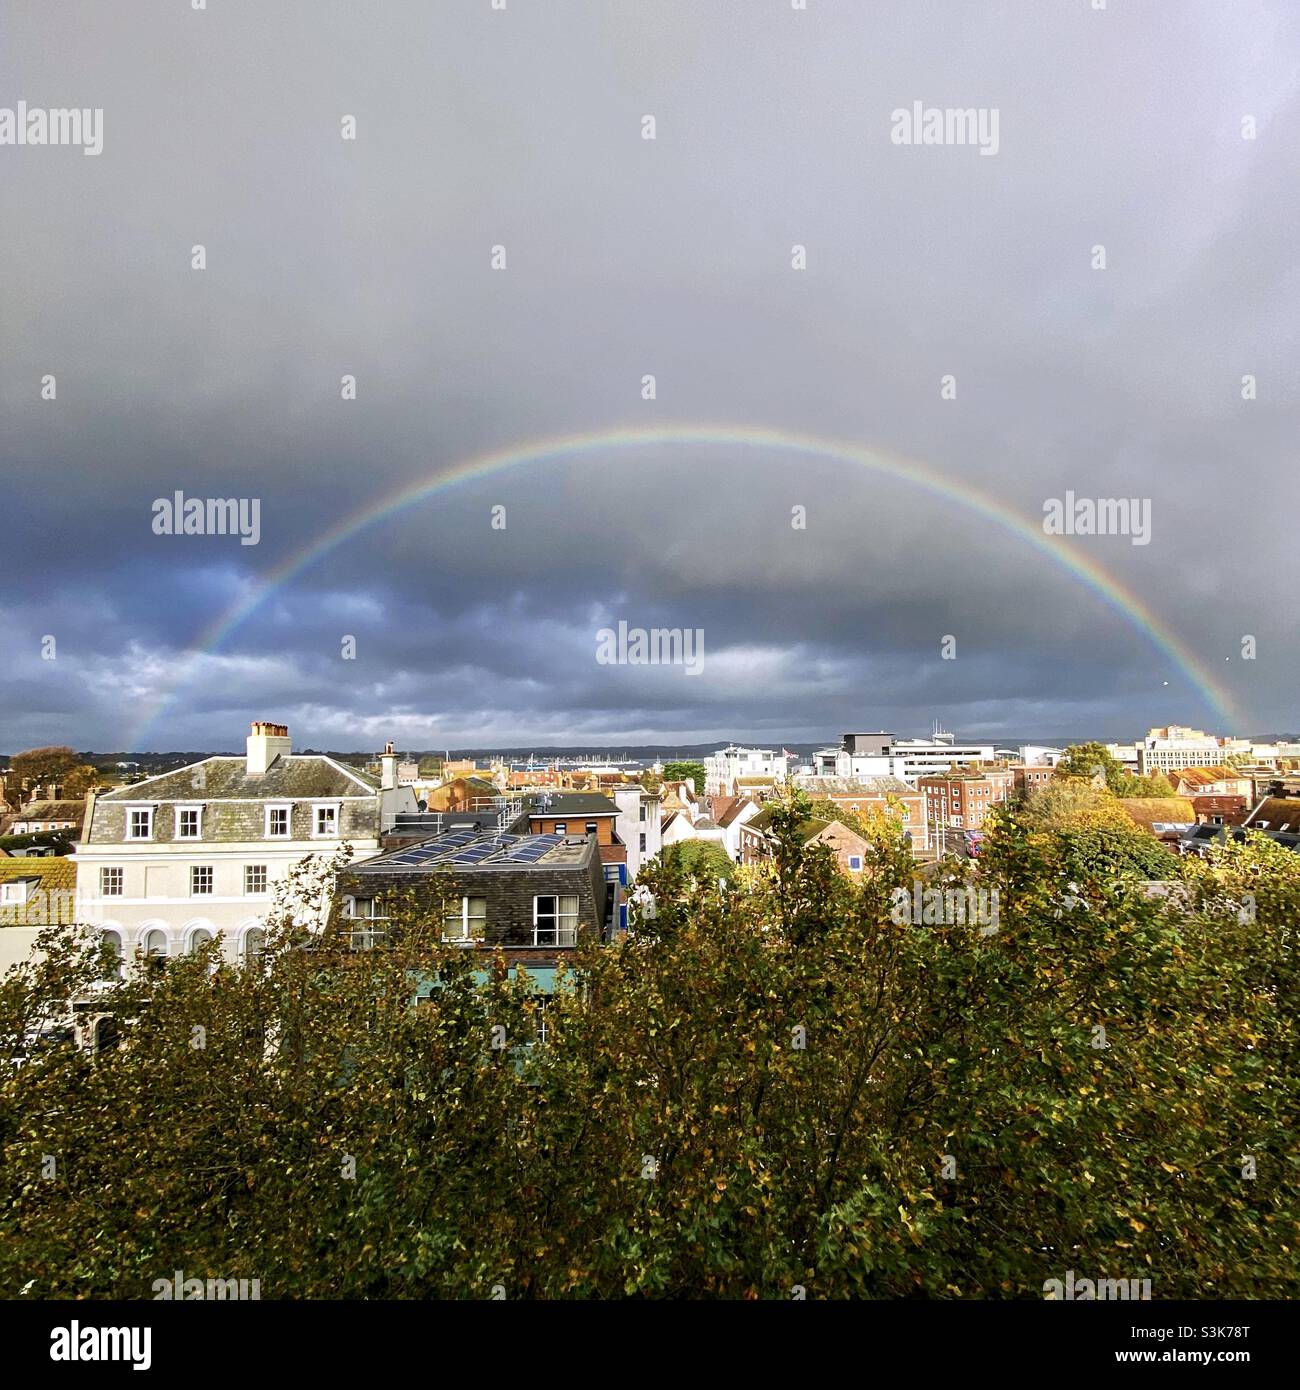 UK Weather: A rainbow shines over the houses of Poole Town during a brief morning rain storm. Poole, Dorset, England, UK. Stock Photo